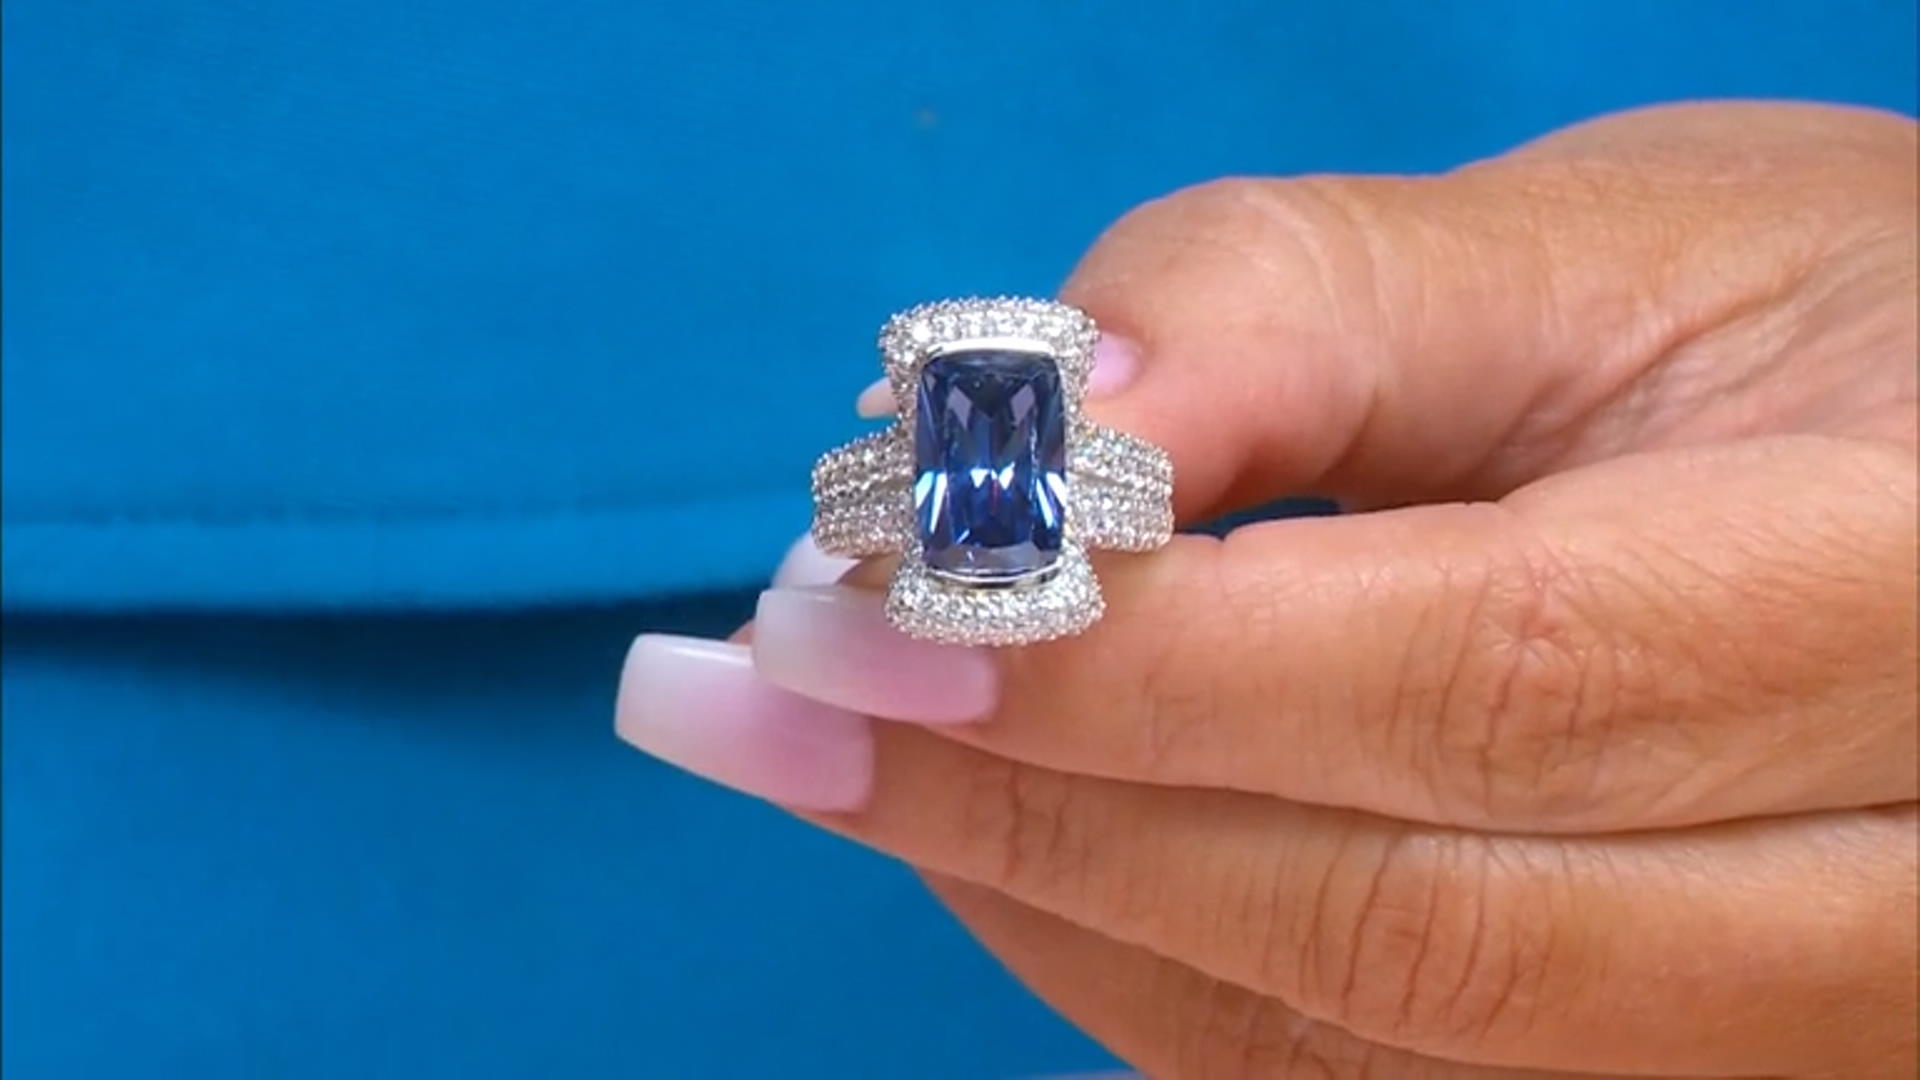 Blue And White Cubic Zirconia Platineve Ring 13.08ctw Video Thumbnail